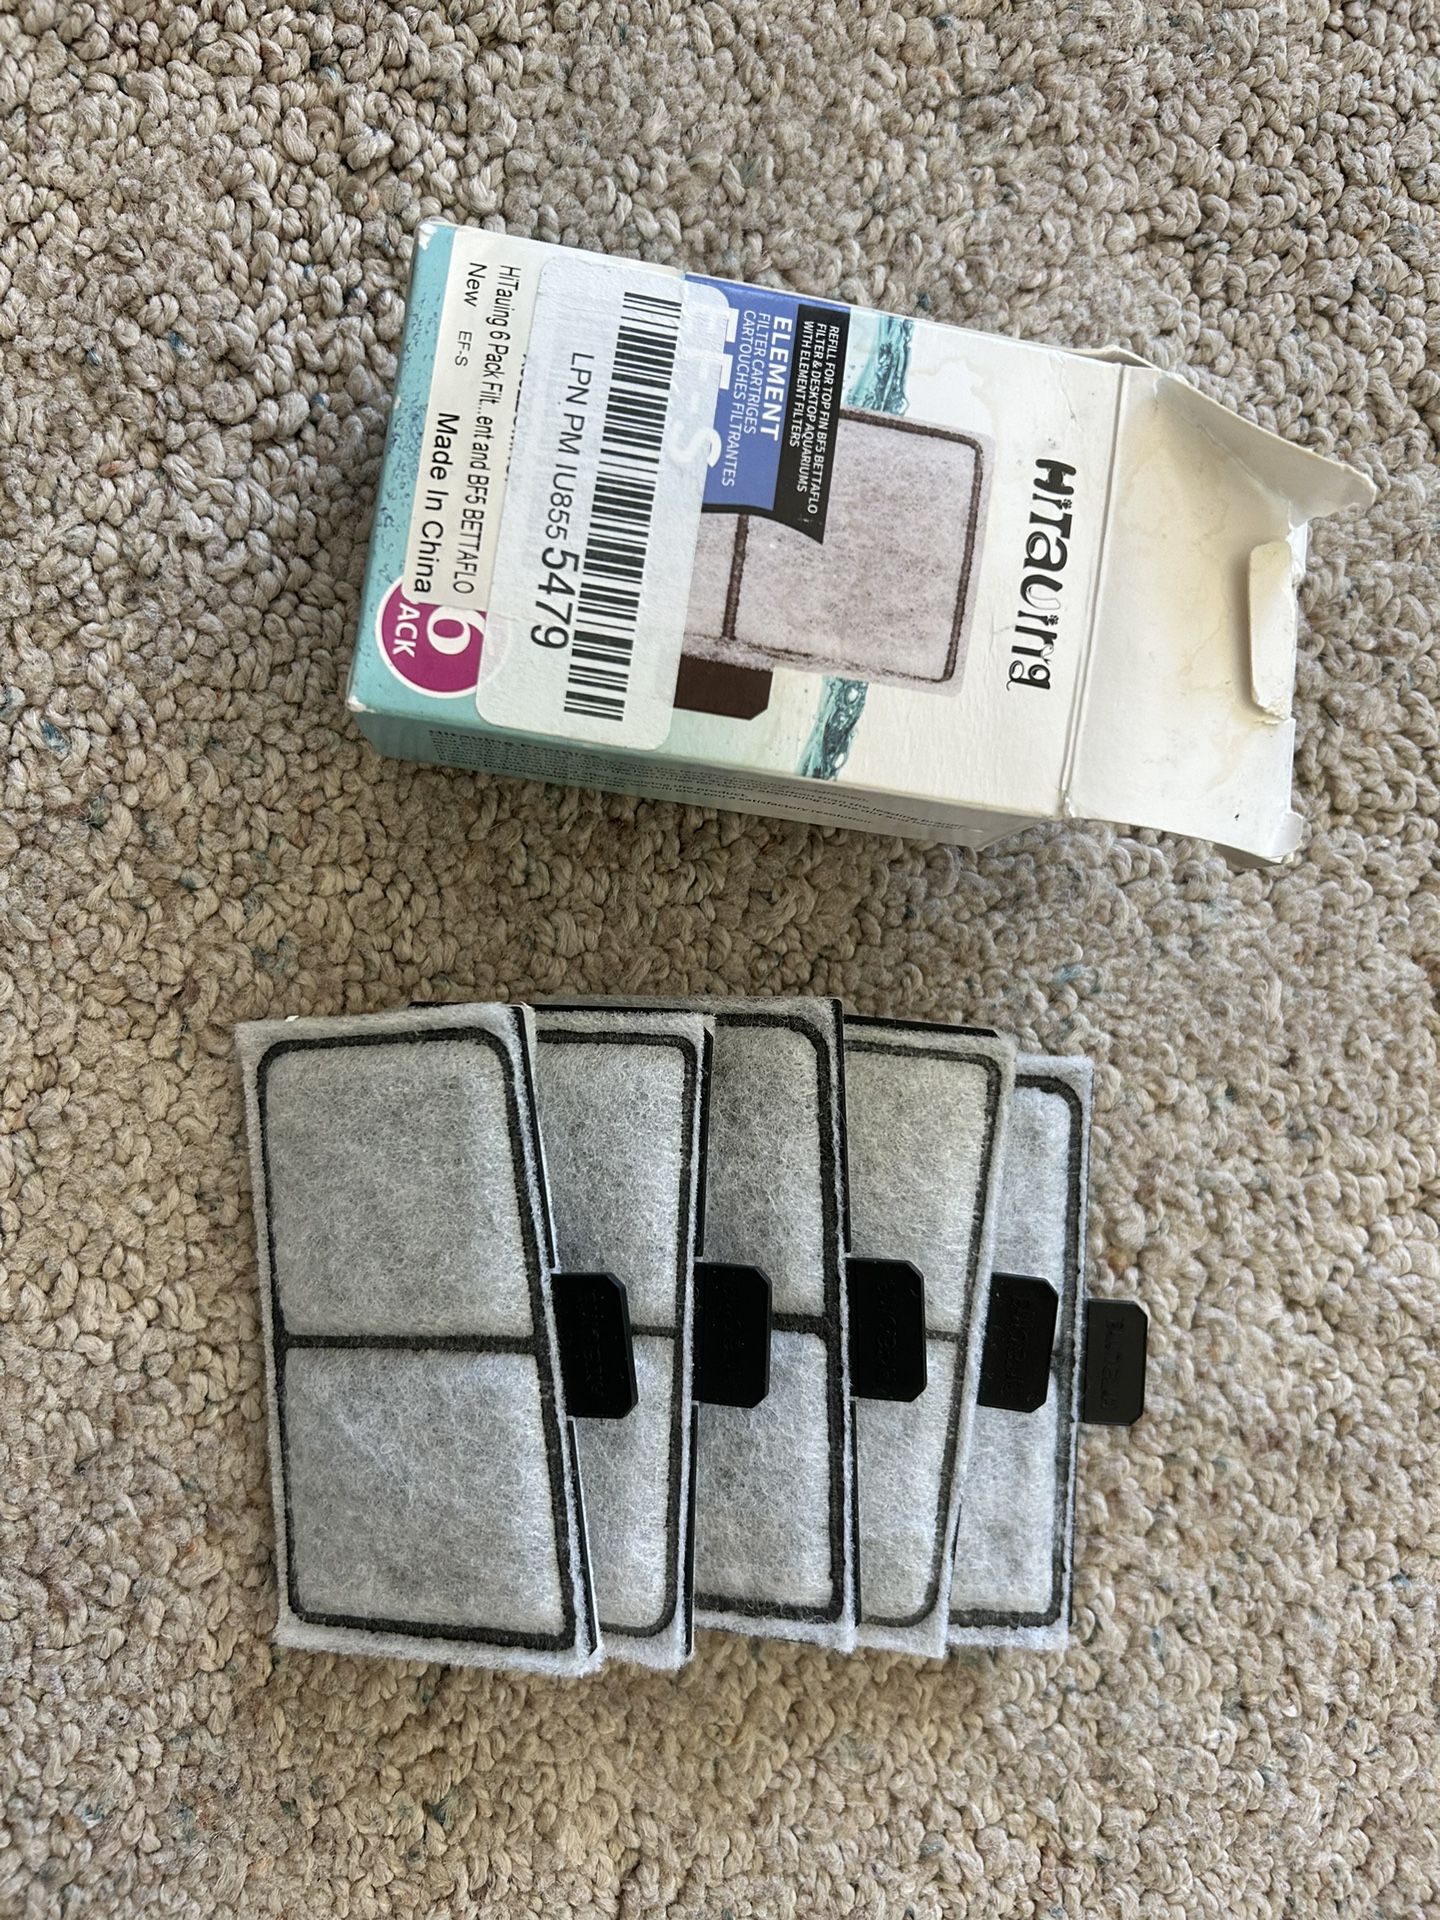 5 Pack of Fish Filters